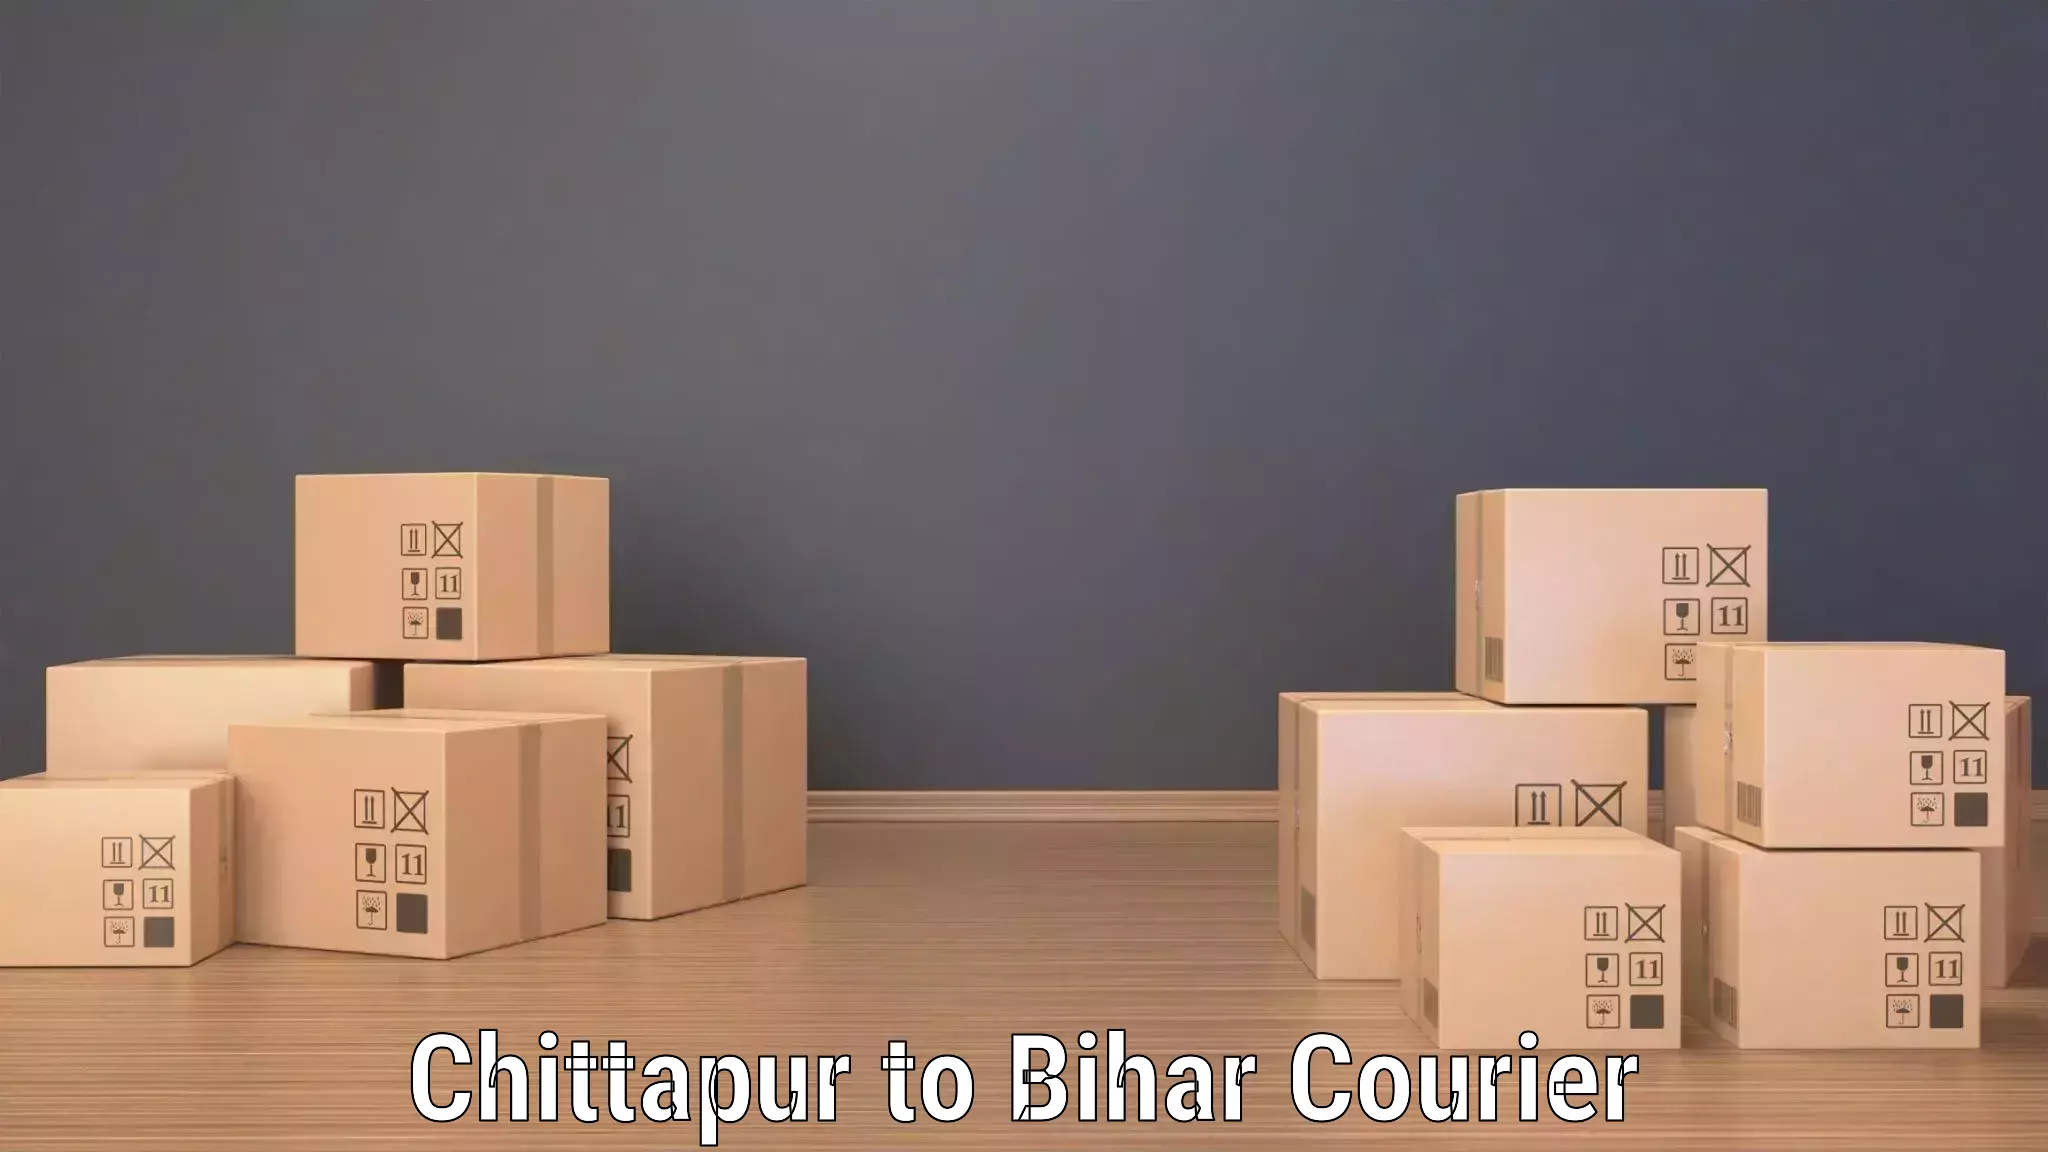 Advanced shipping network Chittapur to Buxar